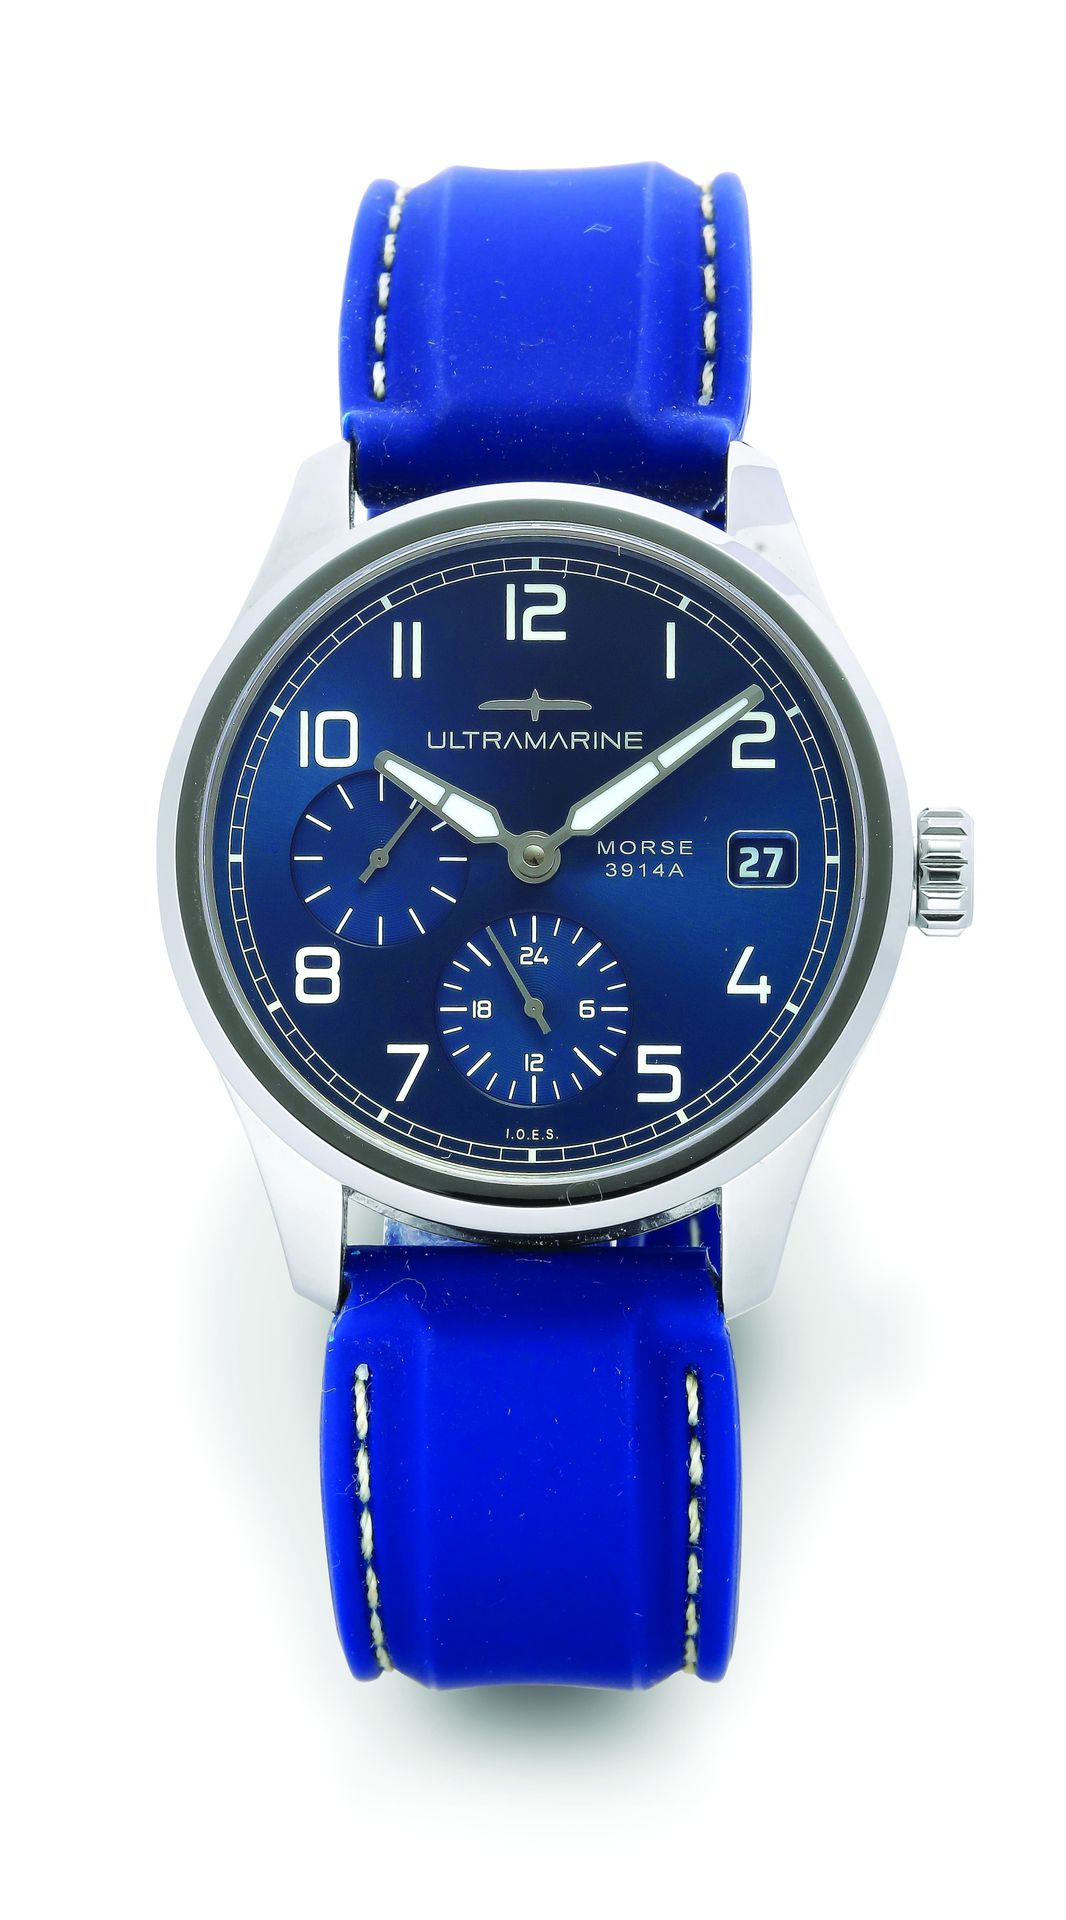 Ultramarine Morse 3914A - 3/300
Steel sports watch with automatic movement - Rou&hellip;